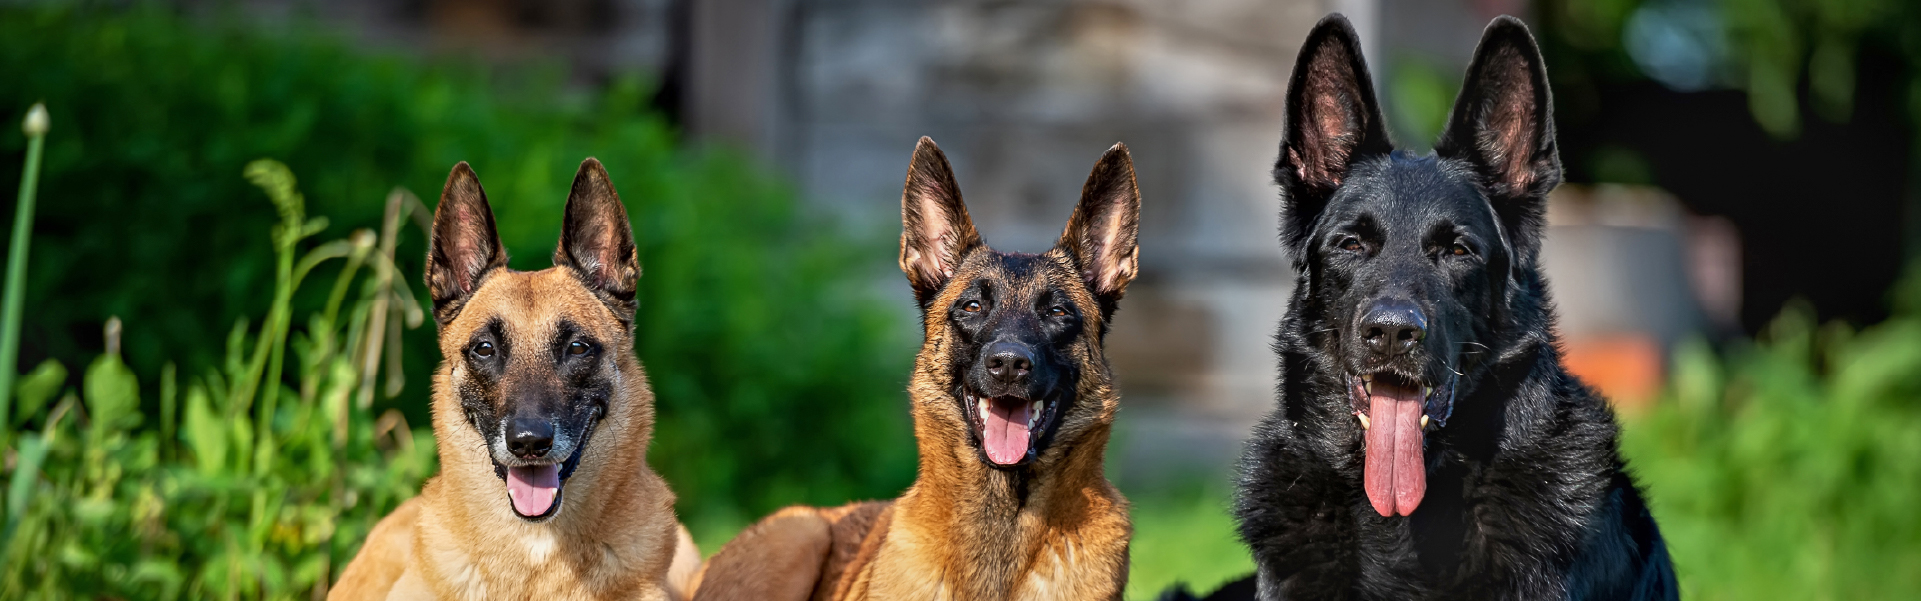 How To Identify the Difference Between Belgian Malinois vs German Shepherd